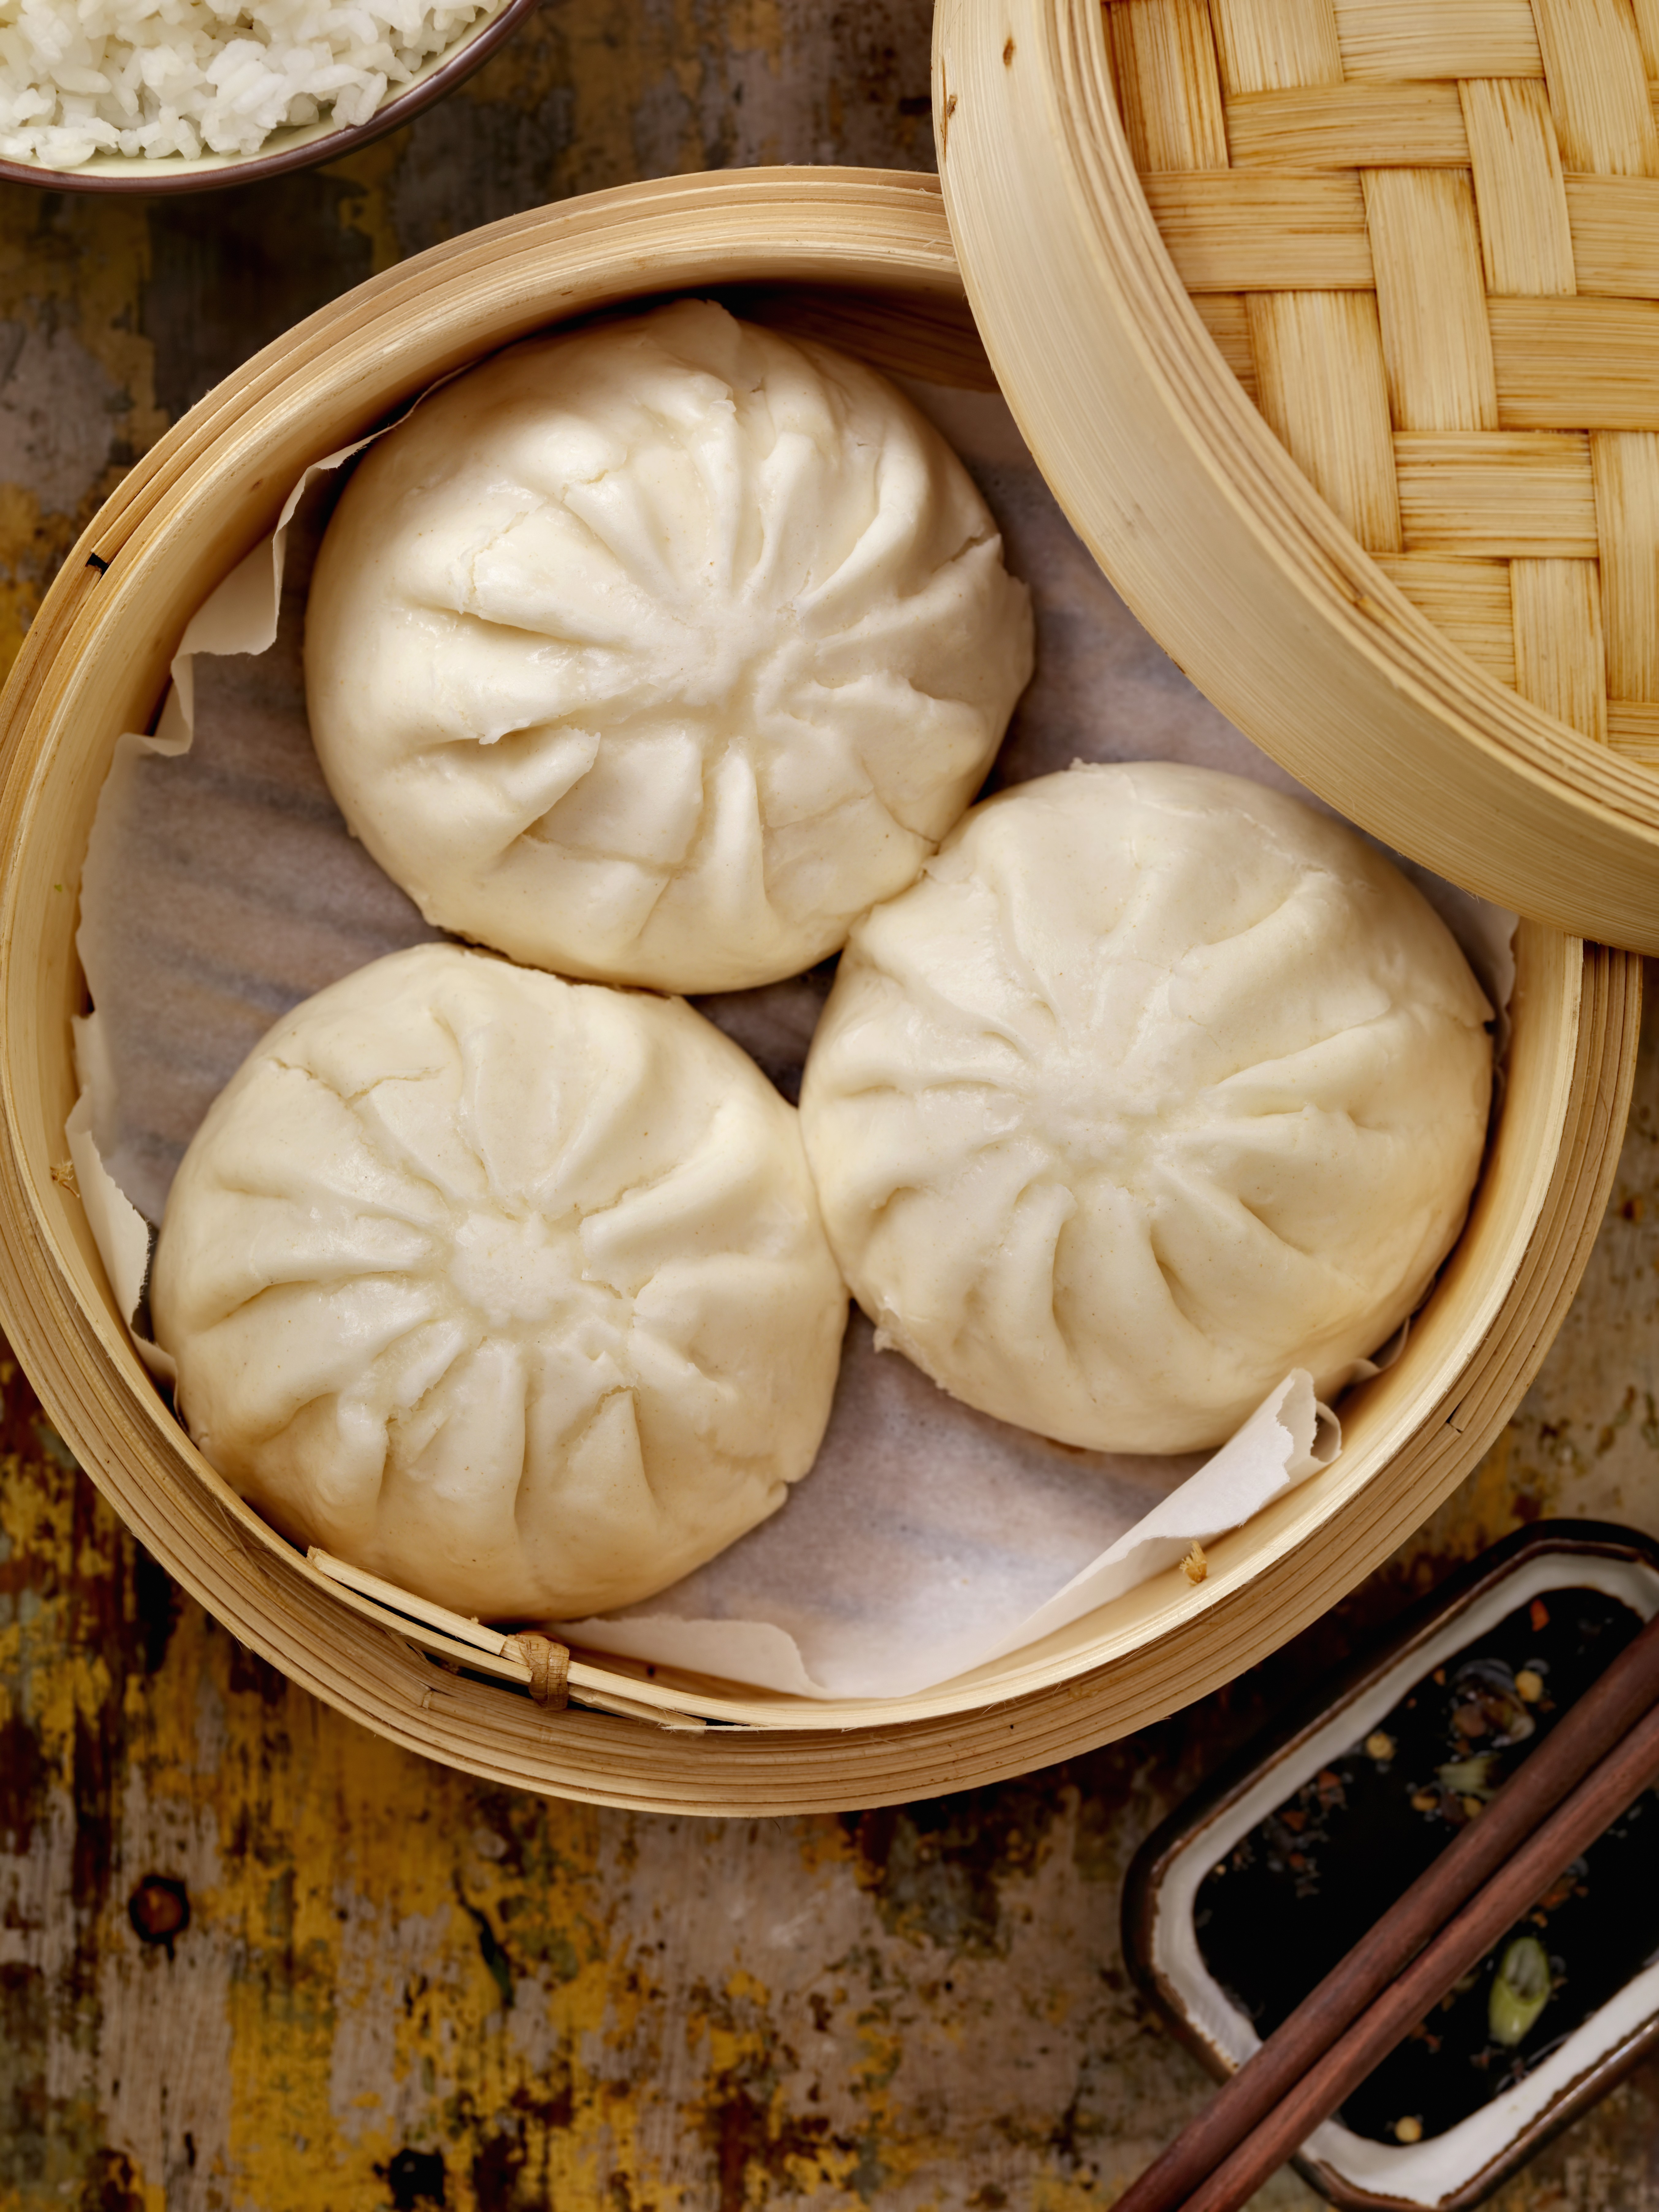 Steamed barbecue pork bun or steamed chicken bun – which is healthier, and by how much? Photo: Getty